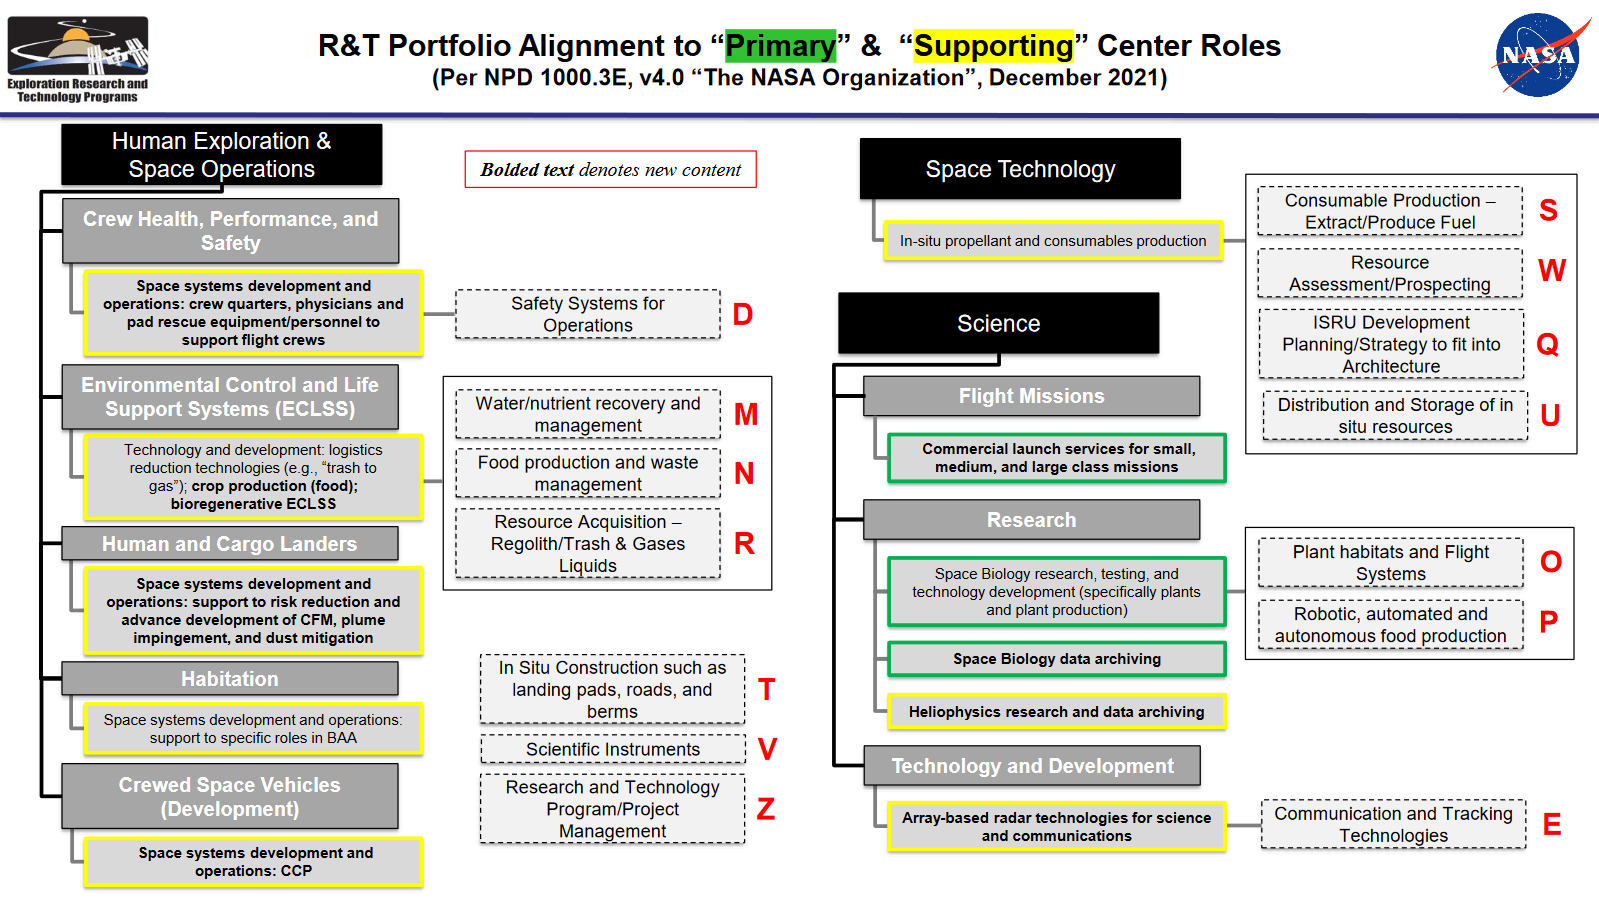 R&T Portfolio Alignment to “Primary” & “Supporting” Center Roles 2nd page